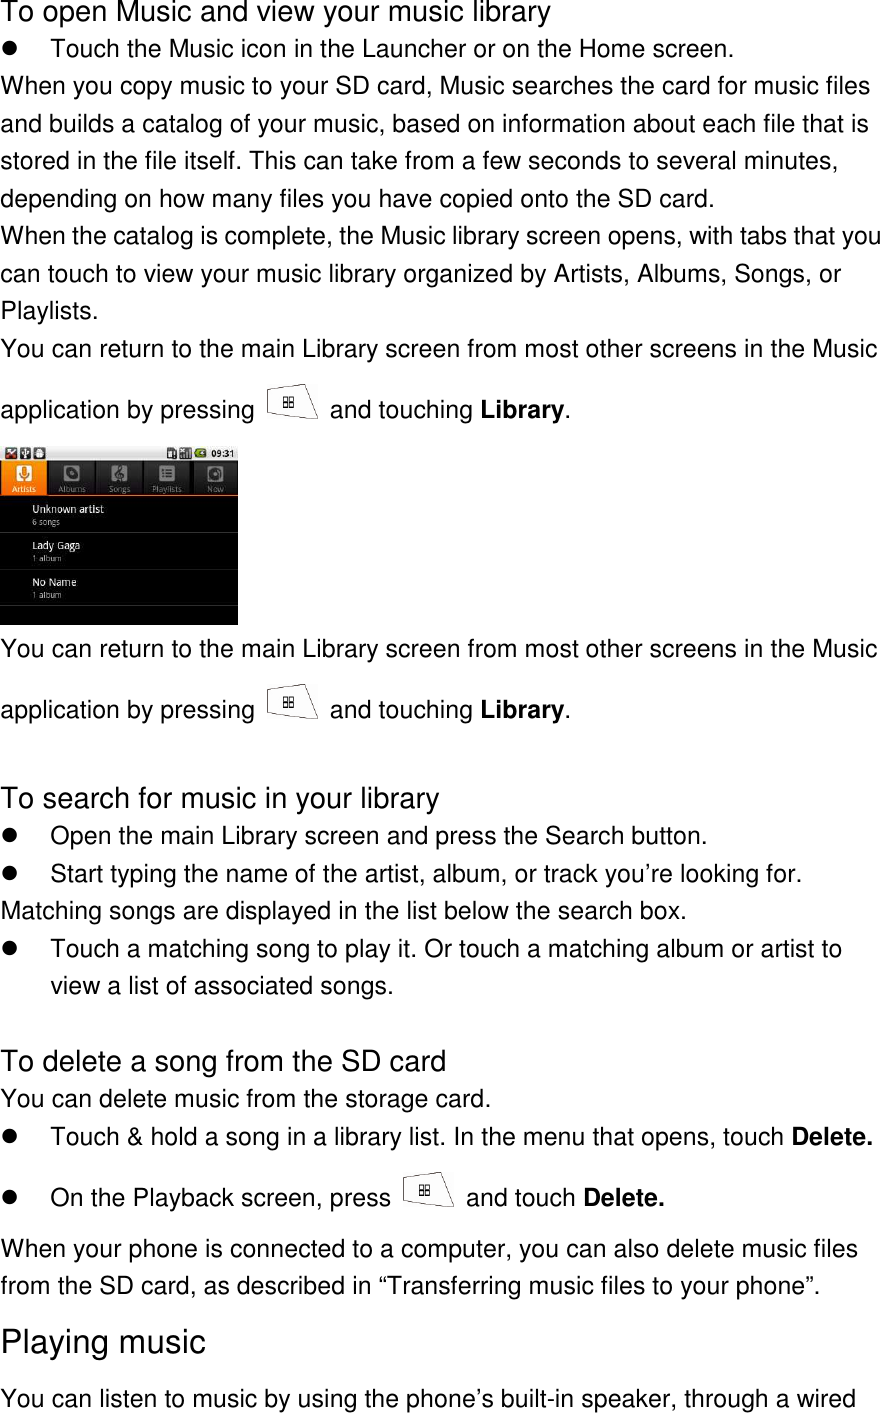 To open Music and view your music library   Touch the Music icon in the Launcher or on the Home screen. When you copy music to your SD card, Music searches the card for music files and builds a catalog of your music, based on information about each file that is stored in the file itself. This can take from a few seconds to several minutes, depending on how many files you have copied onto the SD card. When the catalog is complete, the Music library screen opens, with tabs that you can touch to view your music library organized by Artists, Albums, Songs, or Playlists. You can return to the main Library screen from most other screens in the Music application by pressing    and touching Library.  You can return to the main Library screen from most other screens in the Music application by pressing    and touching Library.  To search for music in your library   Open the main Library screen and press the Search button.   Start typing the name of the artist, album, or track you’re looking for. Matching songs are displayed in the list below the search box.   Touch a matching song to play it. Or touch a matching album or artist to view a list of associated songs.  To delete a song from the SD card You can delete music from the storage card.   Touch &amp; hold a song in a library list. In the menu that opens, touch Delete.   On the Playback screen, press    and touch Delete. When your phone is connected to a computer, you can also delete music files from the SD card, as described in “Transferring music files to your phone”. Playing music You can listen to music by using the phone’s built-in speaker, through a wired 